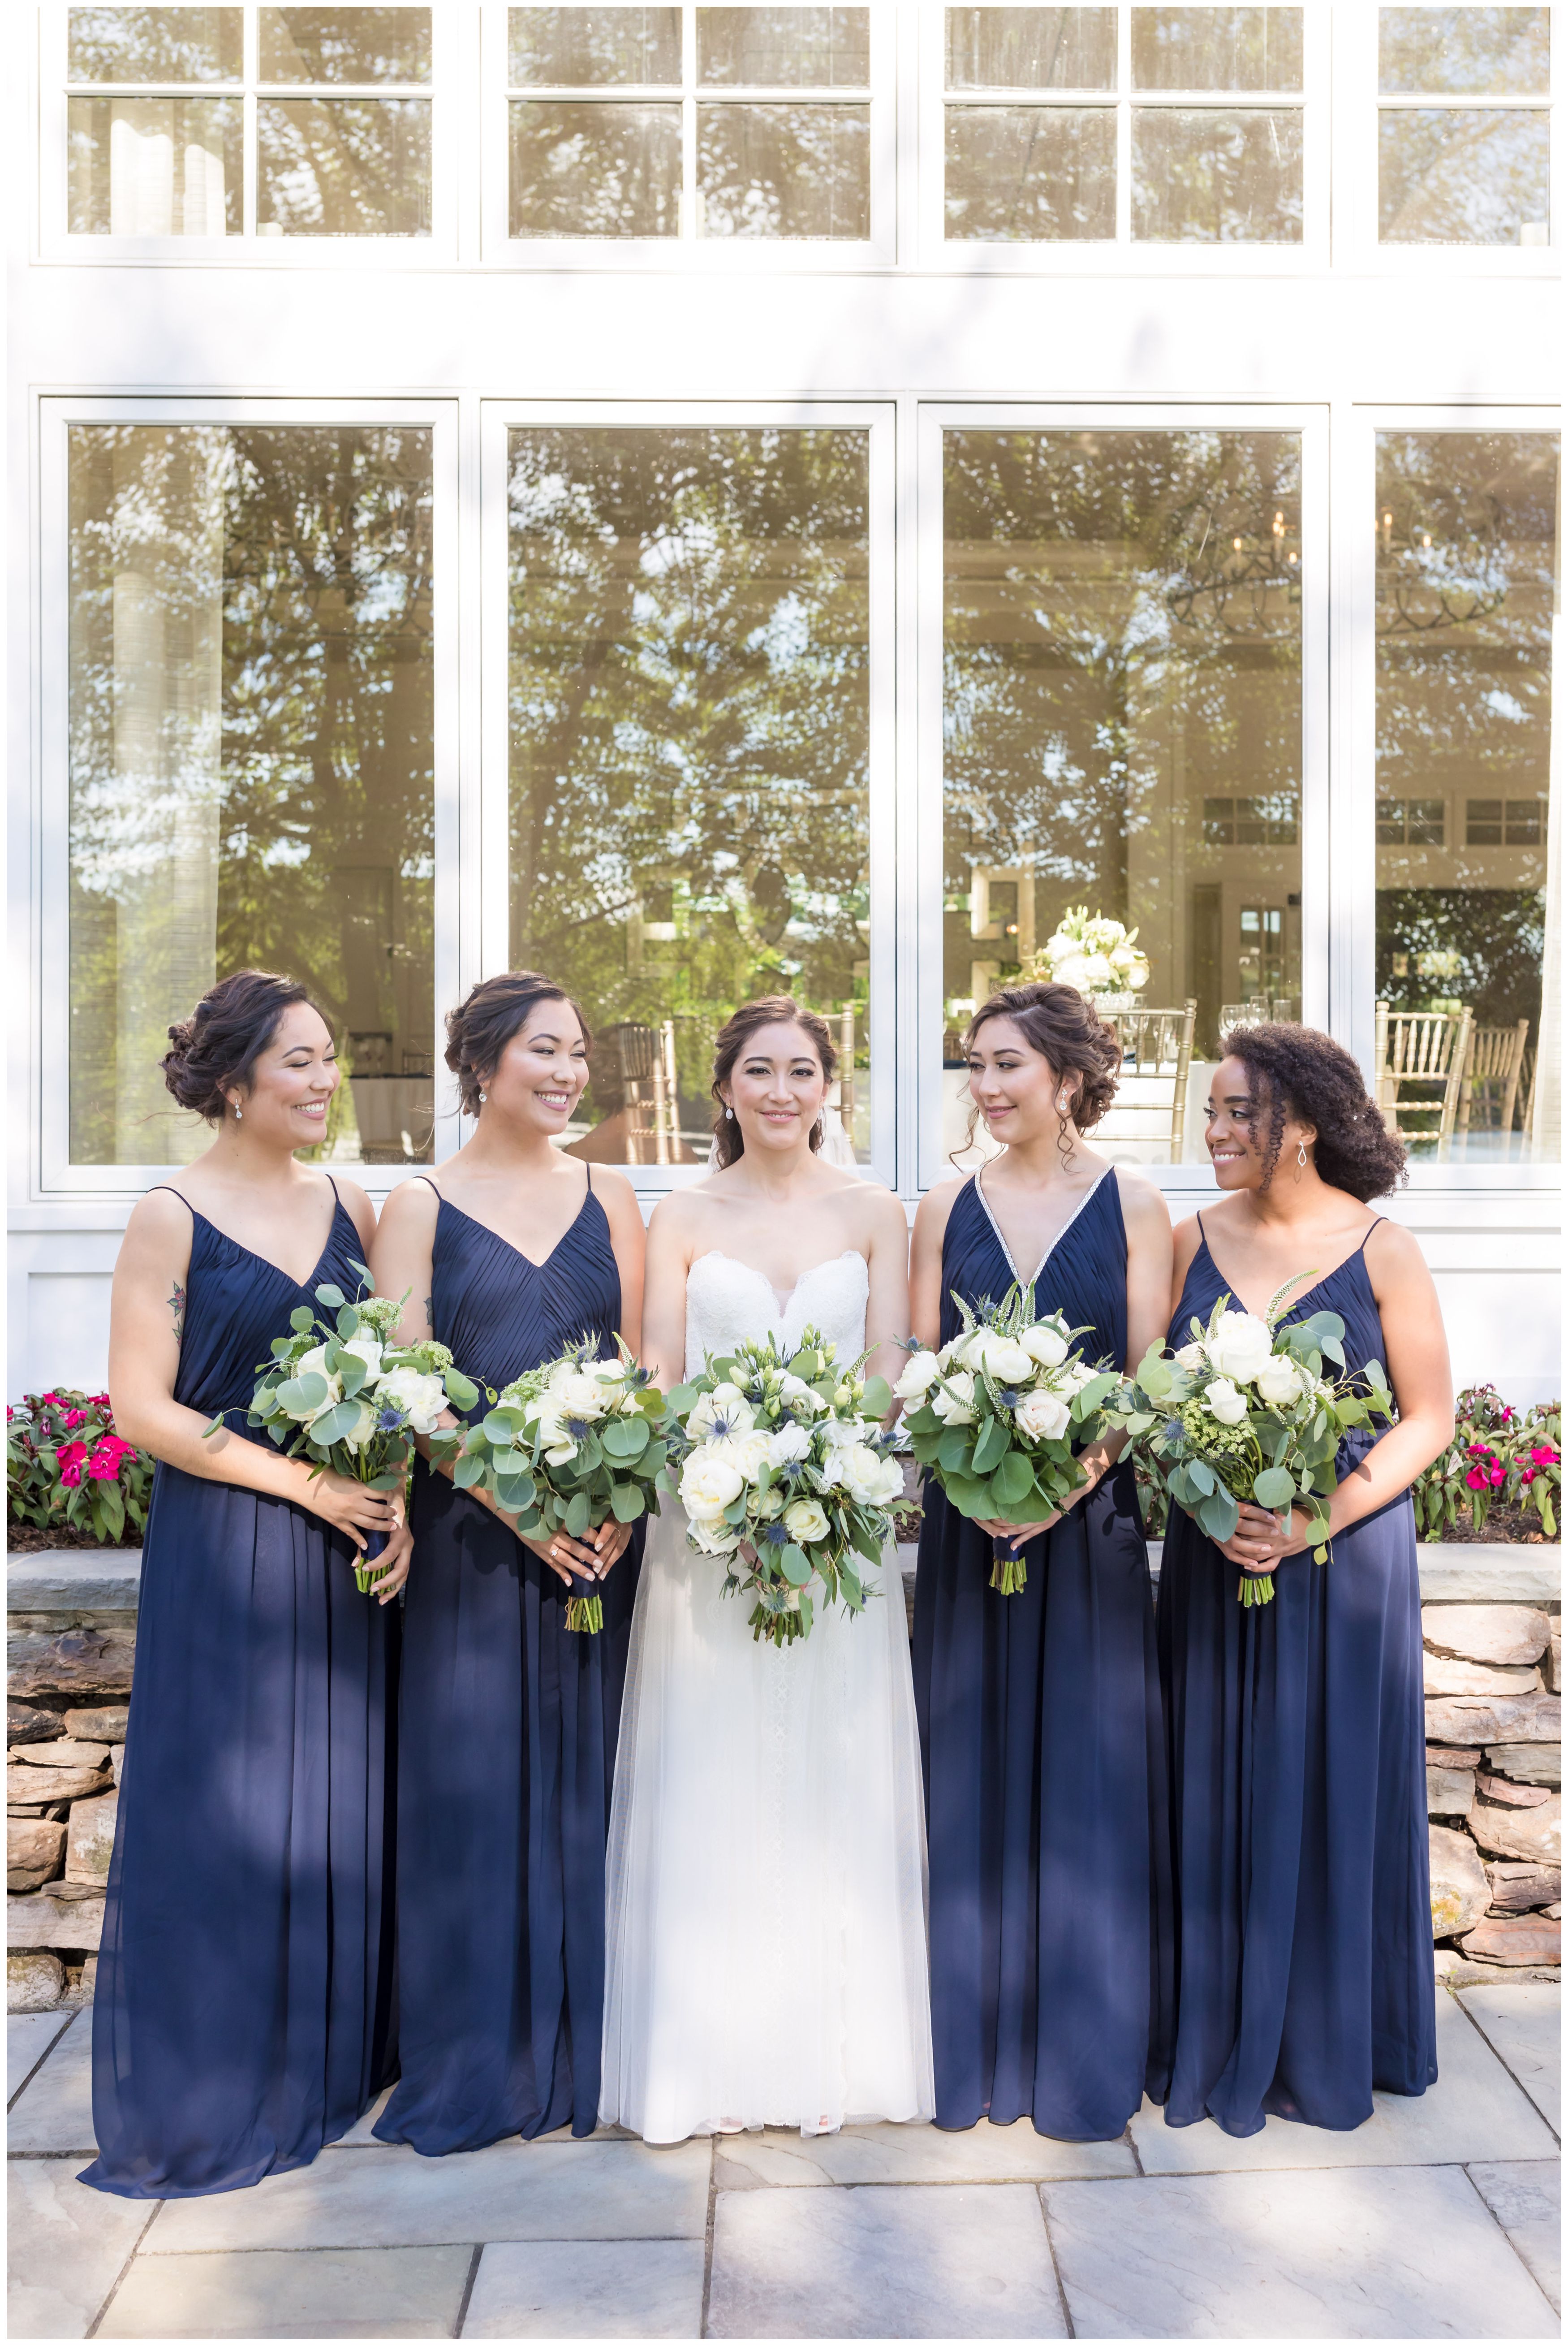 Bridal Party at Indian Trail club with large white peonies and white roses bride bouquet with navy bridesmaids and white roses bouquets